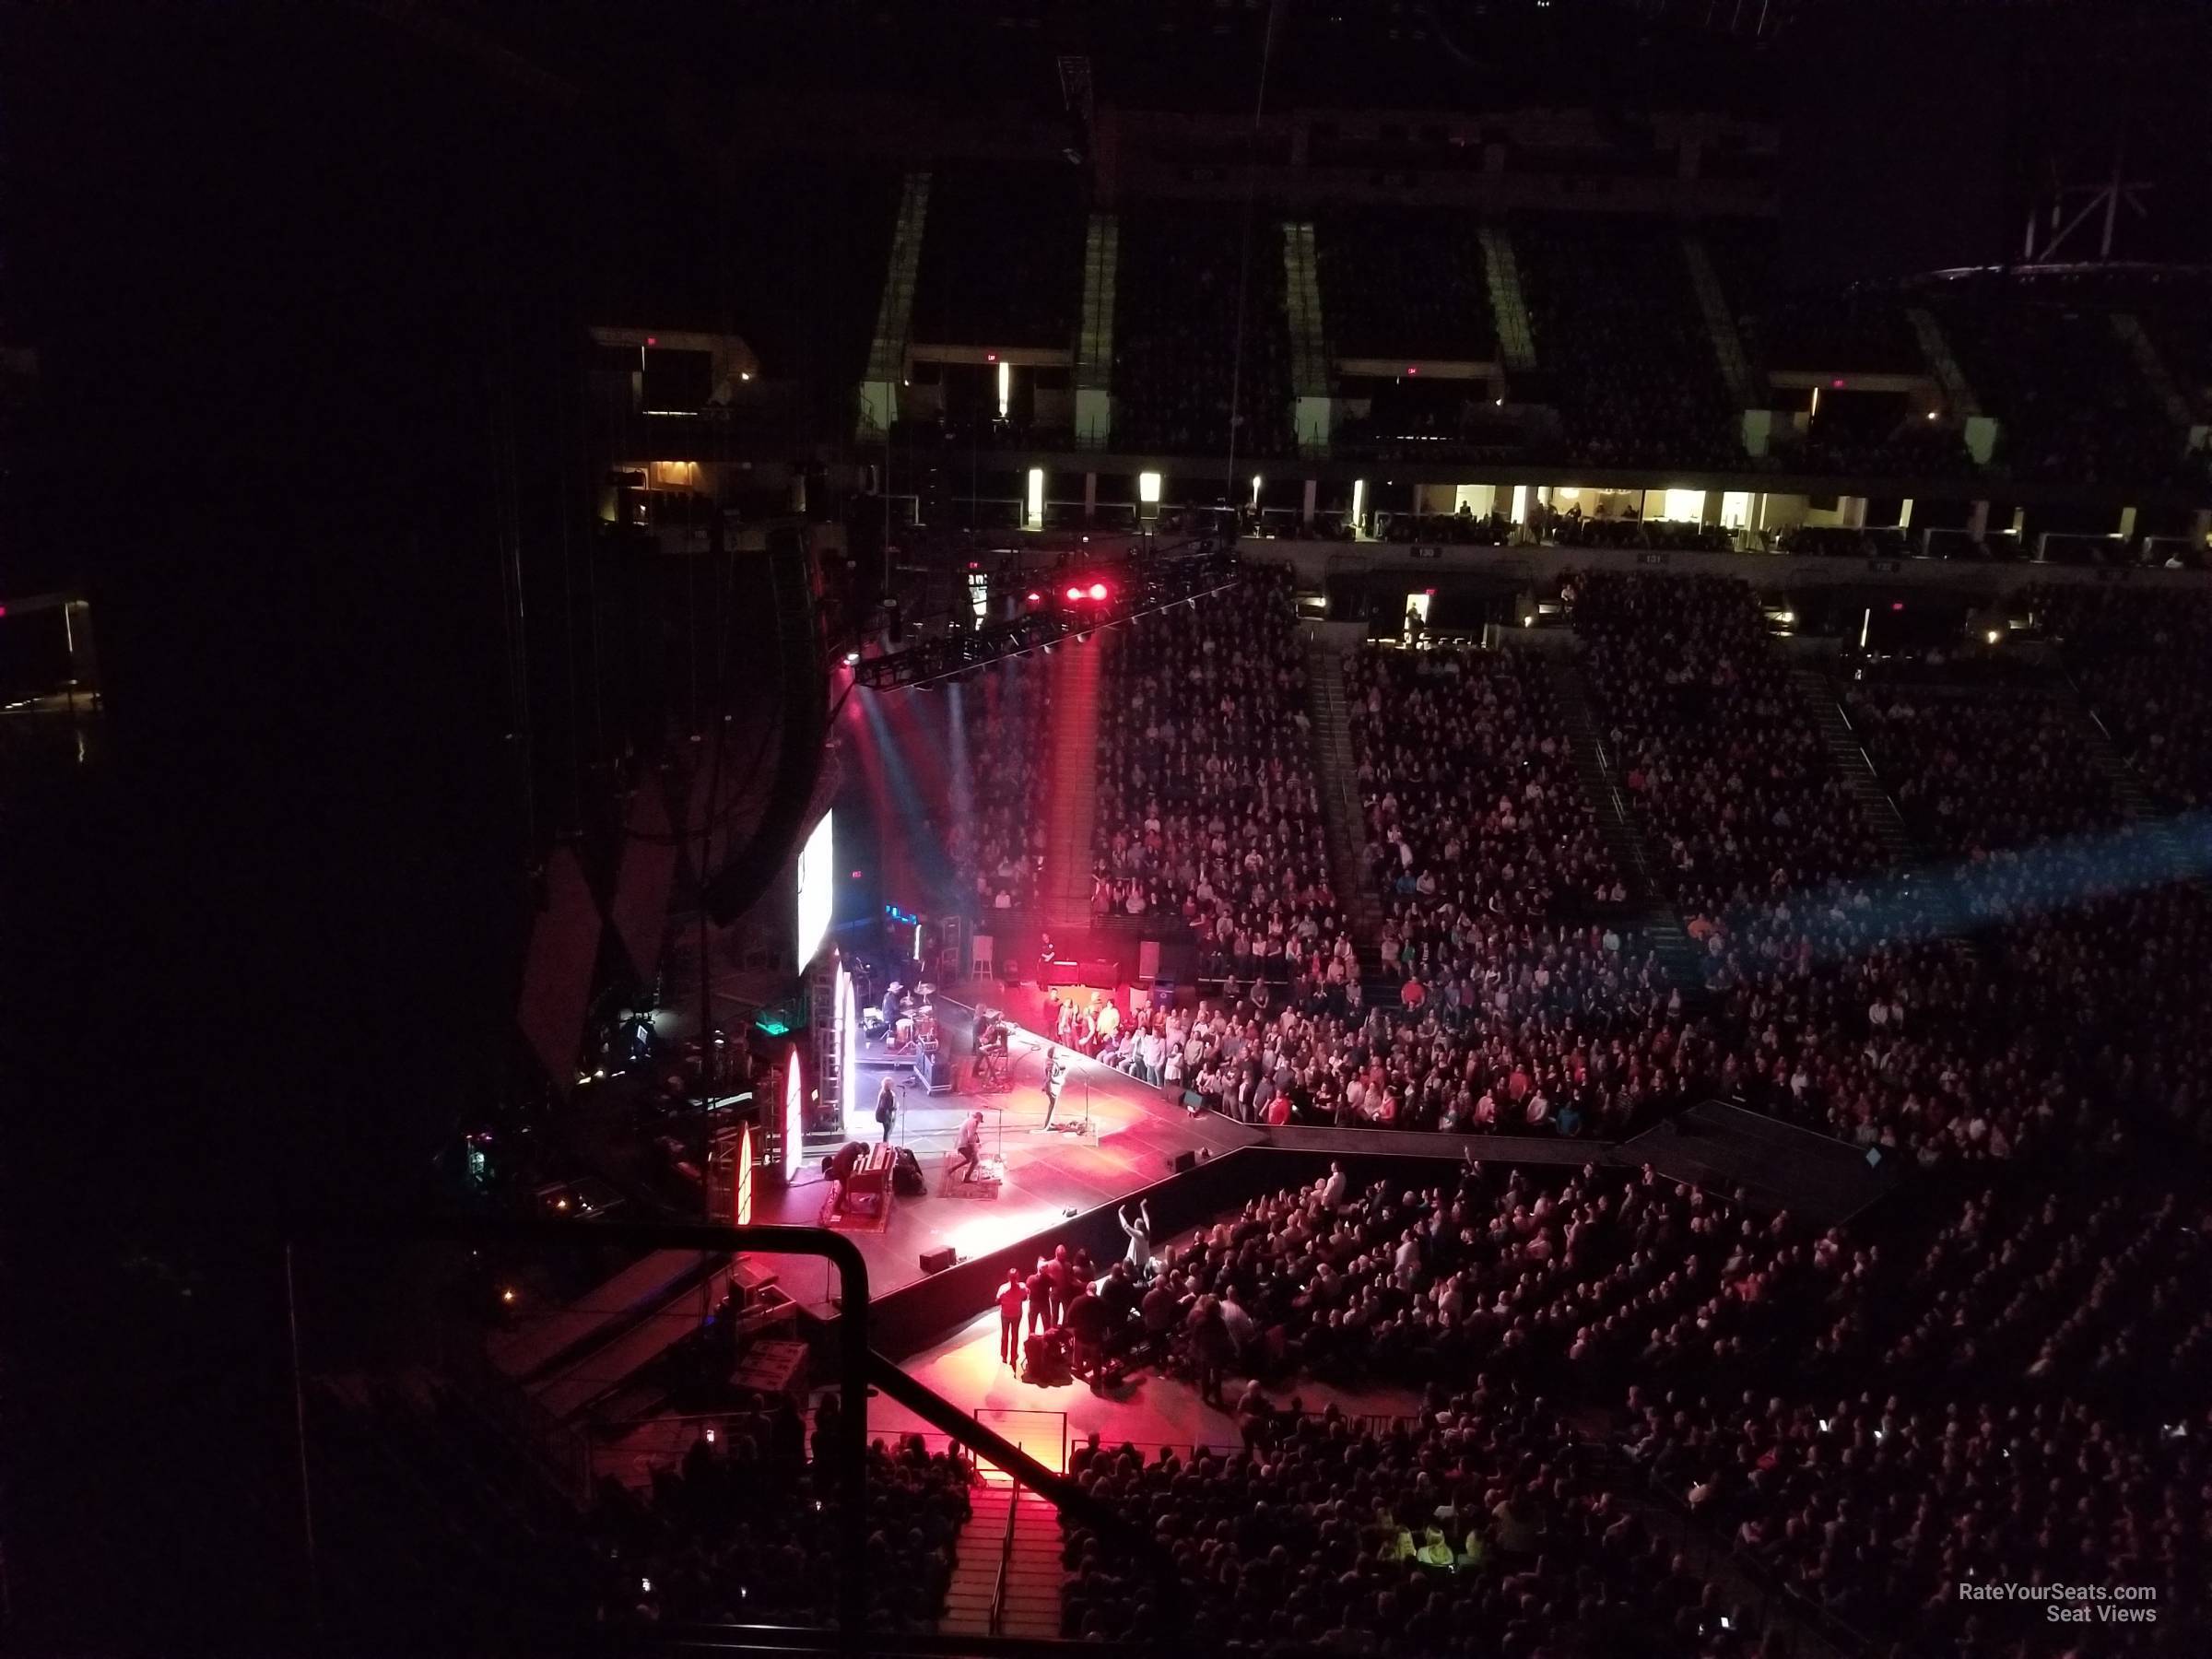 section 213, row c seat view  for concert - target center